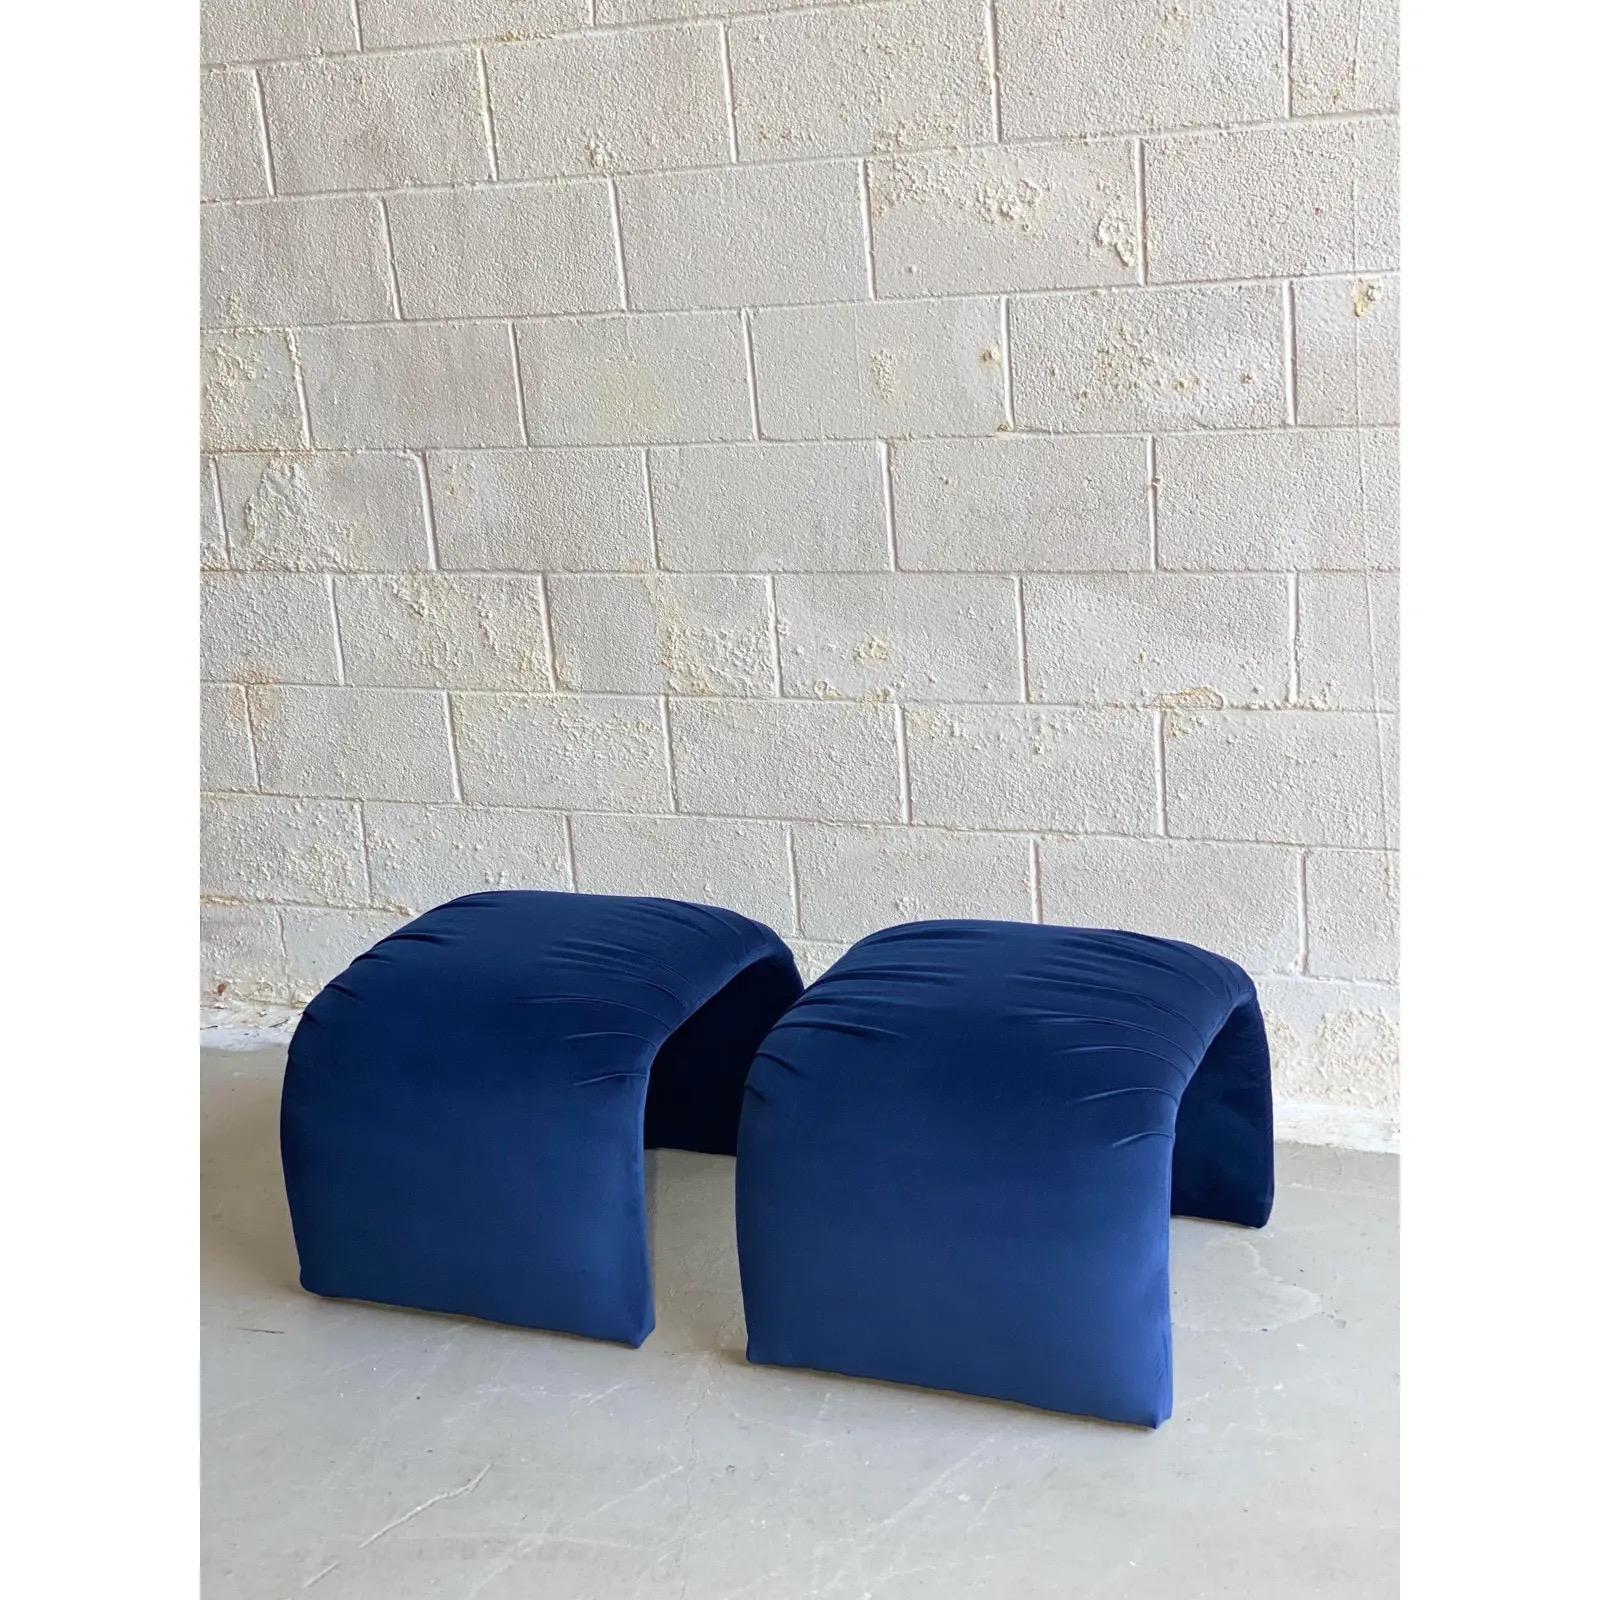 Late 20th Century 1980s Vintage Waterfall Blue Upholstered Ottomans, a Pair For Sale